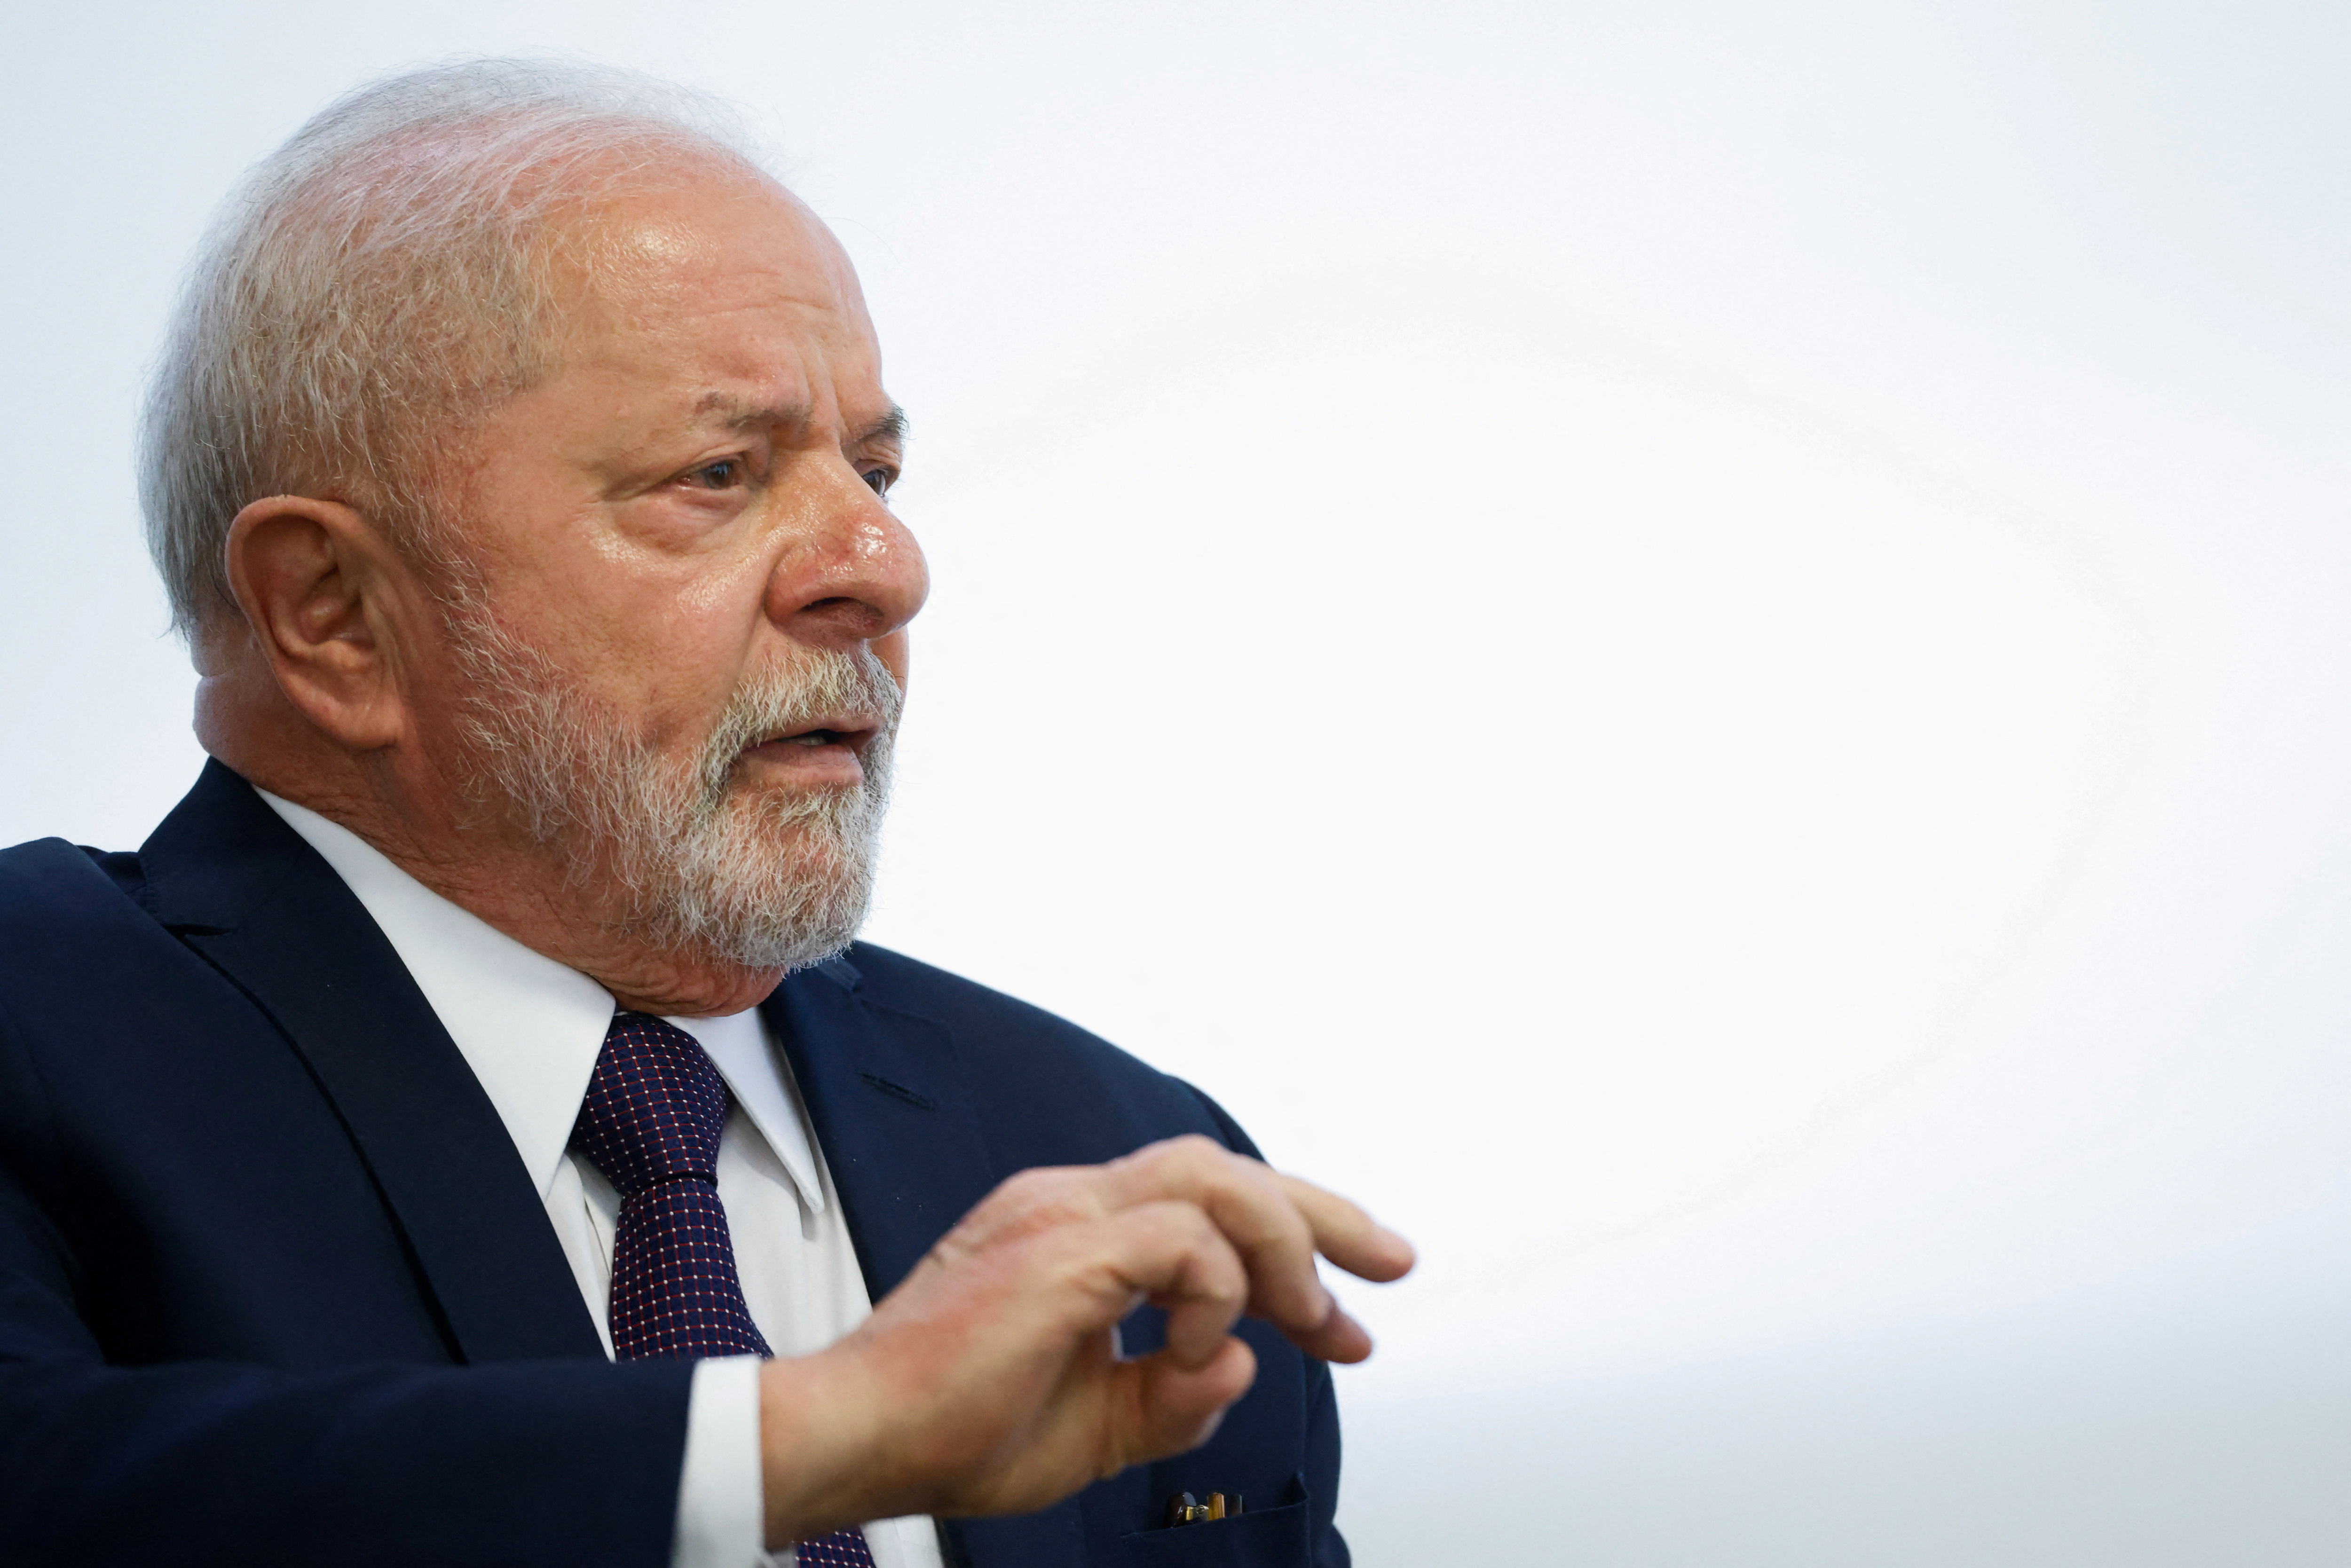 Brazilian president Lula condemns racism, extends show of solidarity with Vinicius